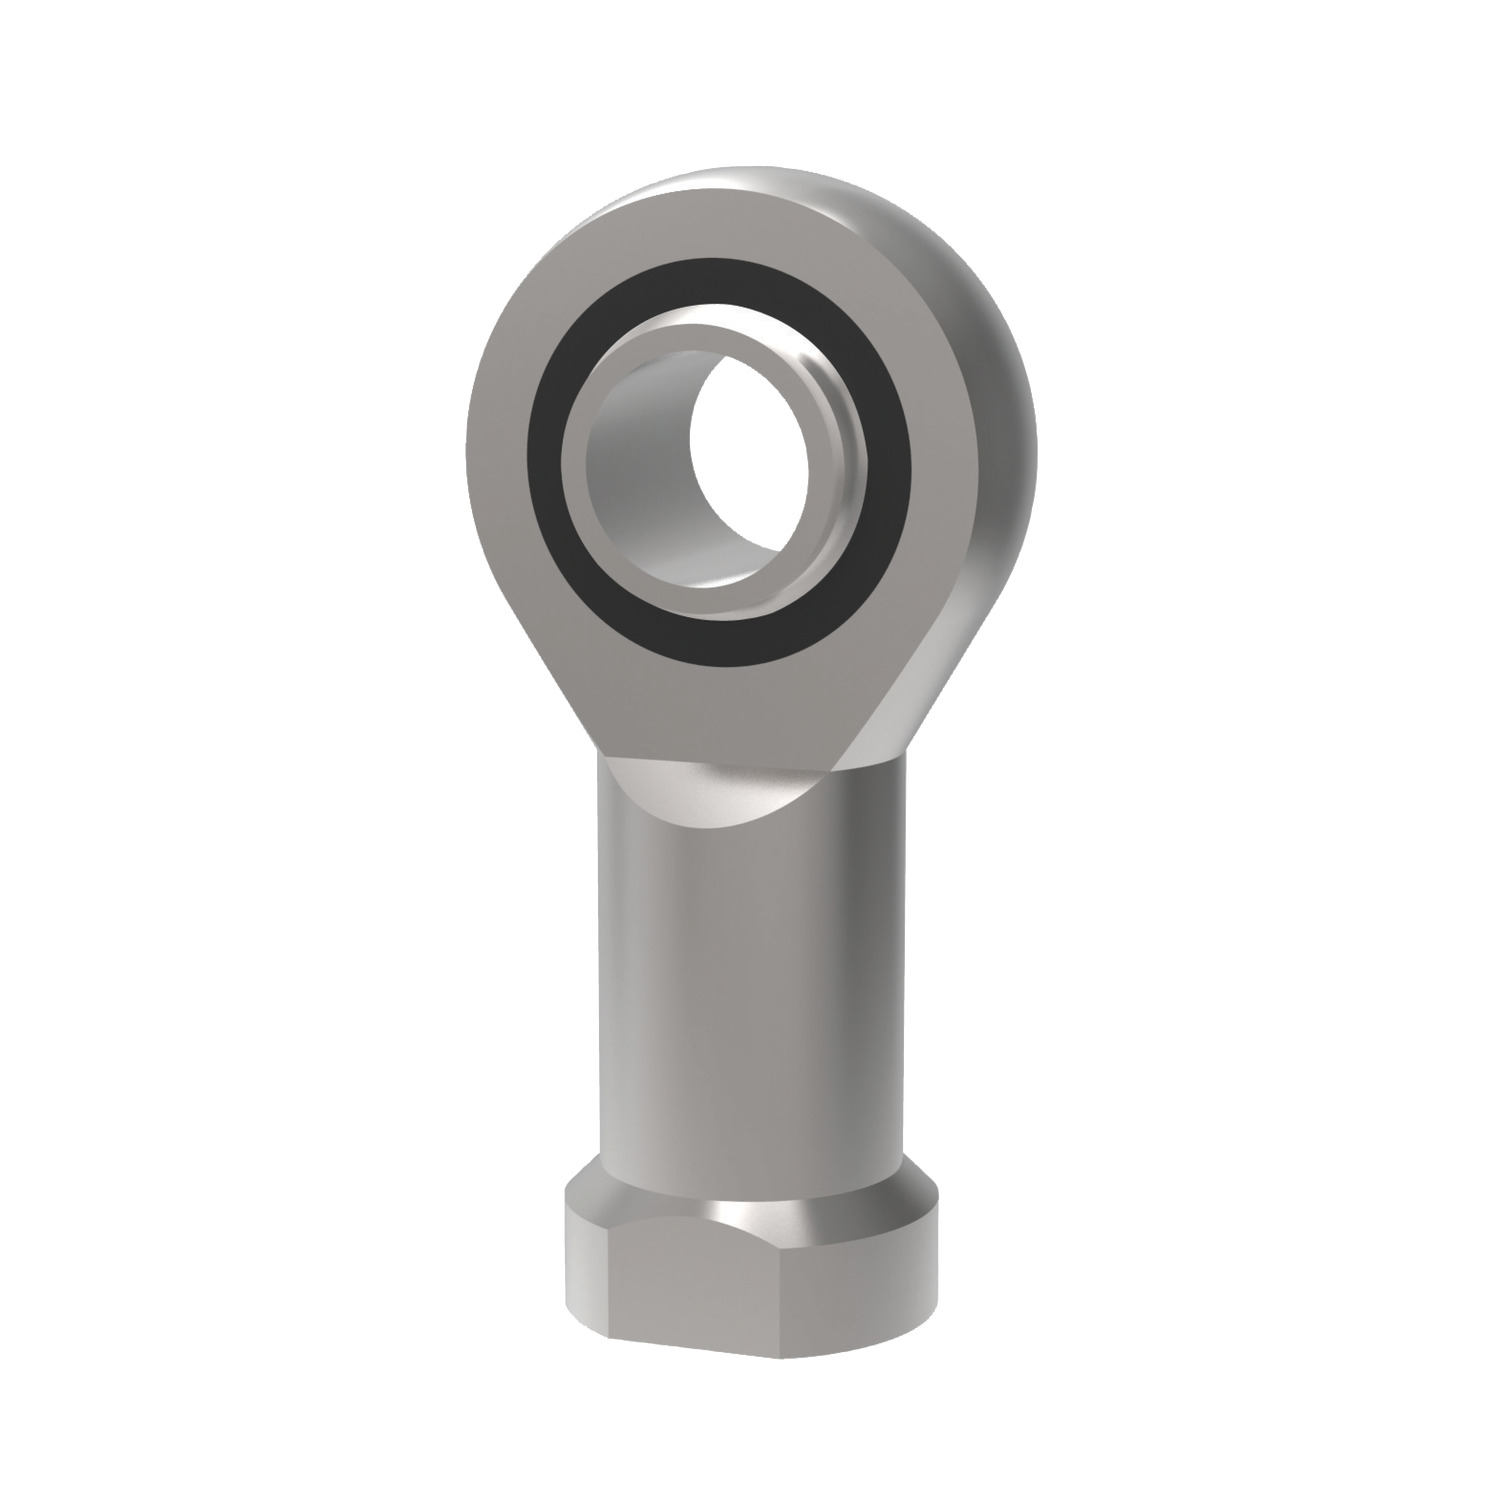 Low Cost Rod End - Female Economy female rod end E series, Zinc plated steel.